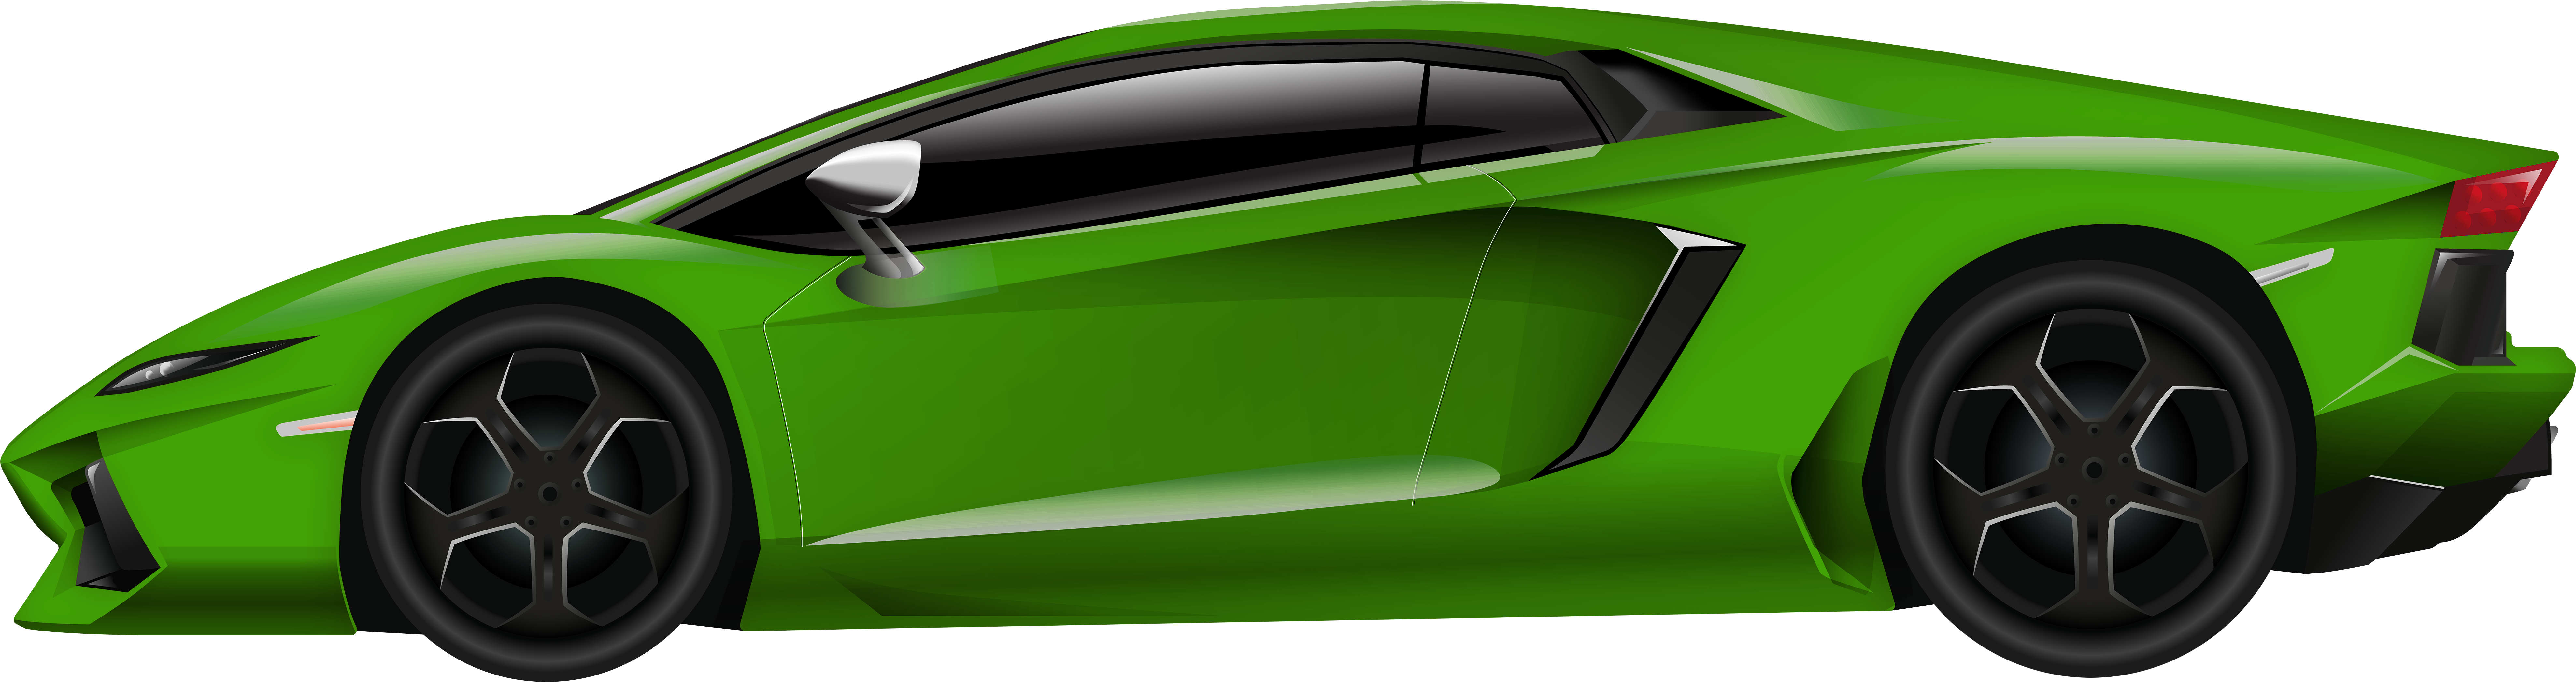 Green Luxury Sports Car Side View PNG